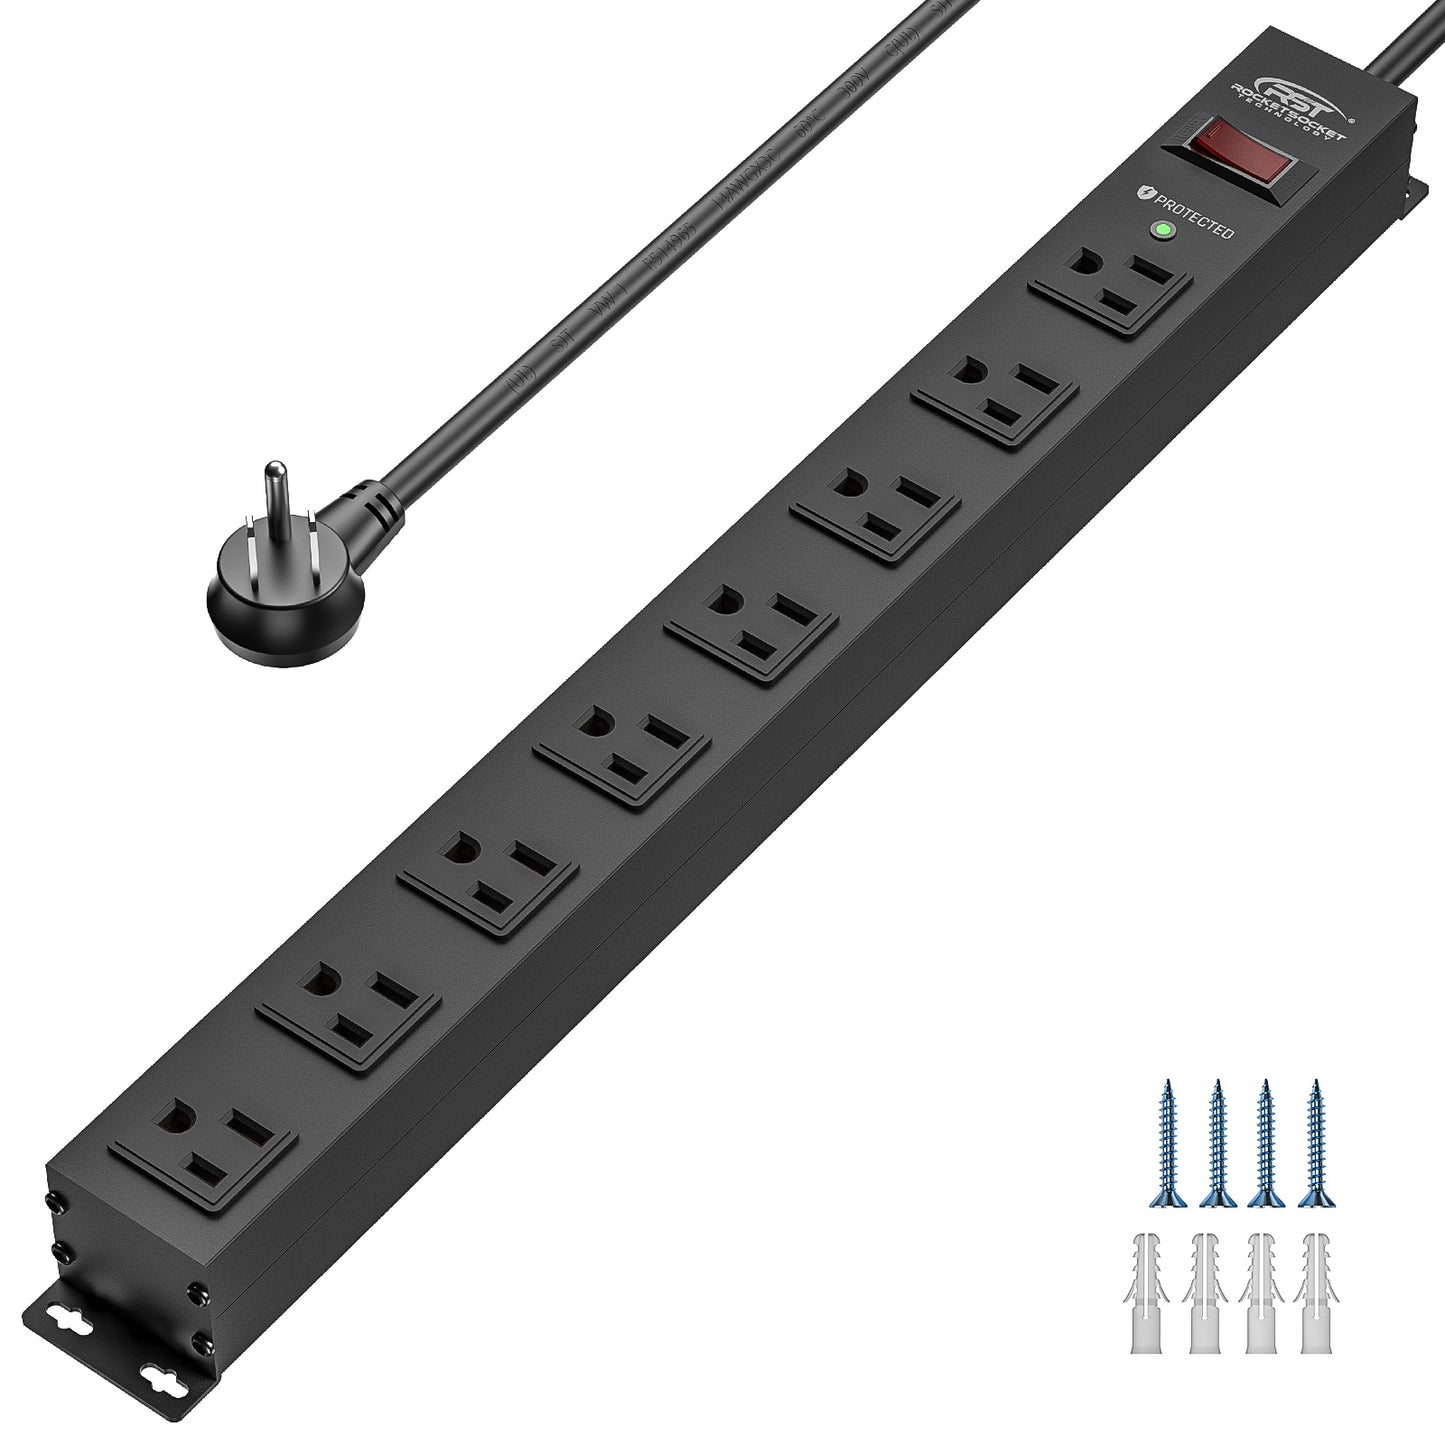 CRST 8 Outlets Wide Spaced Mountable Metal Power Strip Surge Protector, 6FT Flat Plug Power Cord, Mounting Kits Included